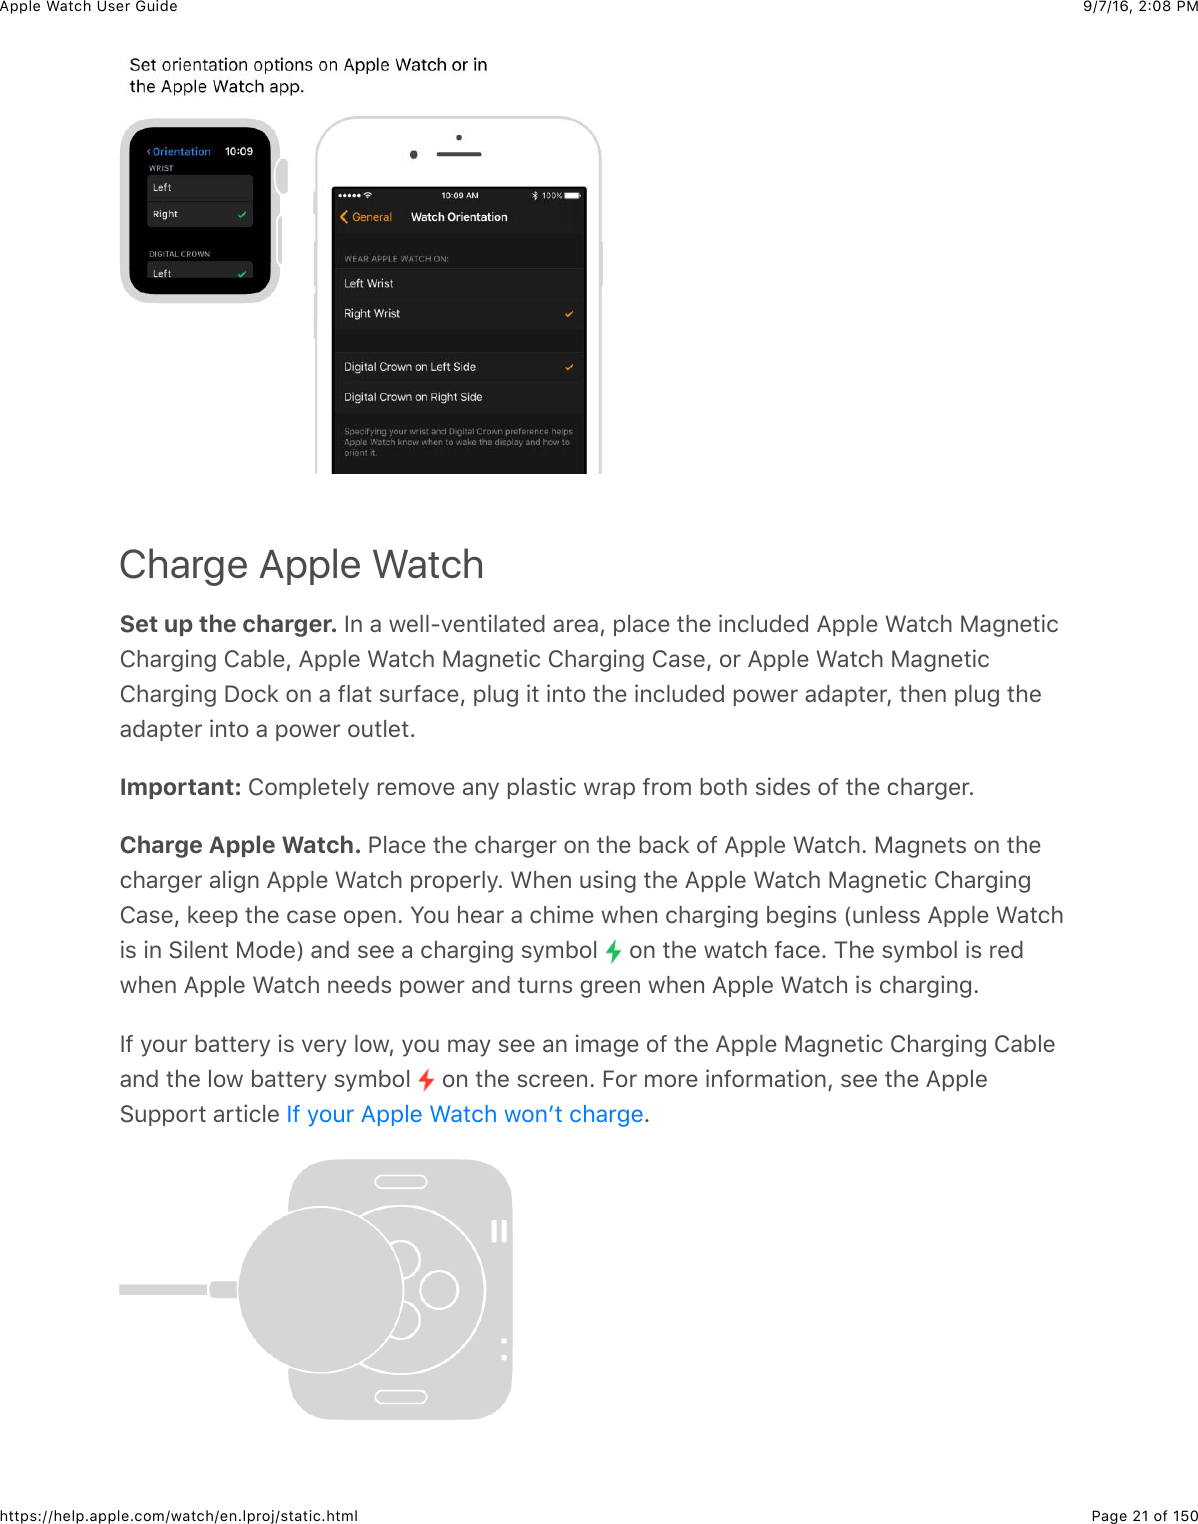 9/7/16, 2)08 PMApple Watch User GuidePage 21 of 150https://help.apple.com/watch/en.lproj/static.htmlCharge Apple WatchSet up the charger. Y,&amp;&apos;&amp;7%&quot;&quot;?.%,3+&quot;&apos;3%0&amp;&apos;*%&apos;J&amp;2&quot;&apos;(%&amp;3)%&amp;+,(&quot;40%0&amp;=22&quot;%&amp;&gt;&apos;3()&amp;F&apos;-,%3+(!)&apos;*-+,-&amp;!&apos;B&quot;%J&amp;=22&quot;%&amp;&gt;&apos;3()&amp;F&apos;-,%3+(&amp;!)&apos;*-+,-&amp;!&apos;$%J&amp;#*&amp;=22&quot;%&amp;&gt;&apos;3()&amp;F&apos;-,%3+(!)&apos;*-+,-&amp;I#(8&amp;#,&amp;&apos;&amp;@&quot;&apos;3&amp;$4*@&apos;(%J&amp;2&quot;4-&amp;+3&amp;+,3#&amp;3)%&amp;+,(&quot;40%0&amp;2#7%*&amp;&apos;0&apos;23%*J&amp;3)%,&amp;2&quot;4-&amp;3)%&apos;0&apos;23%*&amp;+,3#&amp;&apos;&amp;2#7%*&amp;#43&quot;%3CImportant: !#52&quot;%3%&quot;/&amp;*%5#.%&amp;&apos;,/&amp;2&quot;&apos;$3+(&amp;7*&apos;2&amp;@*#5&amp;B#3)&amp;$+0%$&amp;#@&amp;3)%&amp;()&apos;*-%*CCharge Apple Watch. G&quot;&apos;(%&amp;3)%&amp;()&apos;*-%*&amp;#,&amp;3)%&amp;B&apos;(8&amp;#@&amp;=22&quot;%&amp;&gt;&apos;3()C&amp;F&apos;-,%3$&amp;#,&amp;3)%()&apos;*-%*&amp;&apos;&quot;+-,&amp;=22&quot;%&amp;&gt;&apos;3()&amp;2*#2%*&quot;/C&amp;&gt;)%,&amp;4$+,-&amp;3)%&amp;=22&quot;%&amp;&gt;&apos;3()&amp;F&apos;-,%3+(&amp;!)&apos;*-+,-!&apos;$%J&amp;8%%2&amp;3)%&amp;(&apos;$%&amp;#2%,C&amp;S#4&amp;)%&apos;*&amp;&apos;&amp;()+5%&amp;7)%,&amp;()&apos;*-+,-&amp;B%-+,$&amp;P4,&quot;%$$&amp;=22&quot;%&amp;&gt;&apos;3()+$&amp;+,&amp;6+&quot;%,3&amp;F#0%R&amp;&apos;,0&amp;$%%&amp;&apos;&amp;()&apos;*-+,-&amp;$/5B#&quot;&amp; &amp;#,&amp;3)%&amp;7&apos;3()&amp;@&apos;(%C&amp;1)%&amp;$/5B#&quot;&amp;+$&amp;*%07)%,&amp;=22&quot;%&amp;&gt;&apos;3()&amp;,%%0$&amp;2#7%*&amp;&apos;,0&amp;34*,$&amp;-*%%,&amp;7)%,&amp;=22&quot;%&amp;&gt;&apos;3()&amp;+$&amp;()&apos;*-+,-CY@&amp;/#4*&amp;B&apos;33%*/&amp;+$&amp;.%*/&amp;&quot;#7J&amp;/#4&amp;5&apos;/&amp;$%%&amp;&apos;,&amp;+5&apos;-%&amp;#@&amp;3)%&amp;=22&quot;%&amp;F&apos;-,%3+(&amp;!)&apos;*-+,-&amp;!&apos;B&quot;%&apos;,0&amp;3)%&amp;&quot;#7&amp;B&apos;33%*/&amp;$/5B#&quot;&amp; &amp;#,&amp;3)%&amp;$(*%%,C&amp;E#*&amp;5#*%&amp;+,@#*5&apos;3+#,J&amp;$%%&amp;3)%&amp;=22&quot;%6422#*3&amp;&apos;*3+(&quot;%&amp; CY@&amp;/#4*&amp;=22&quot;%&amp;&gt;&apos;3()&amp;7#,W3&amp;()&apos;*-%